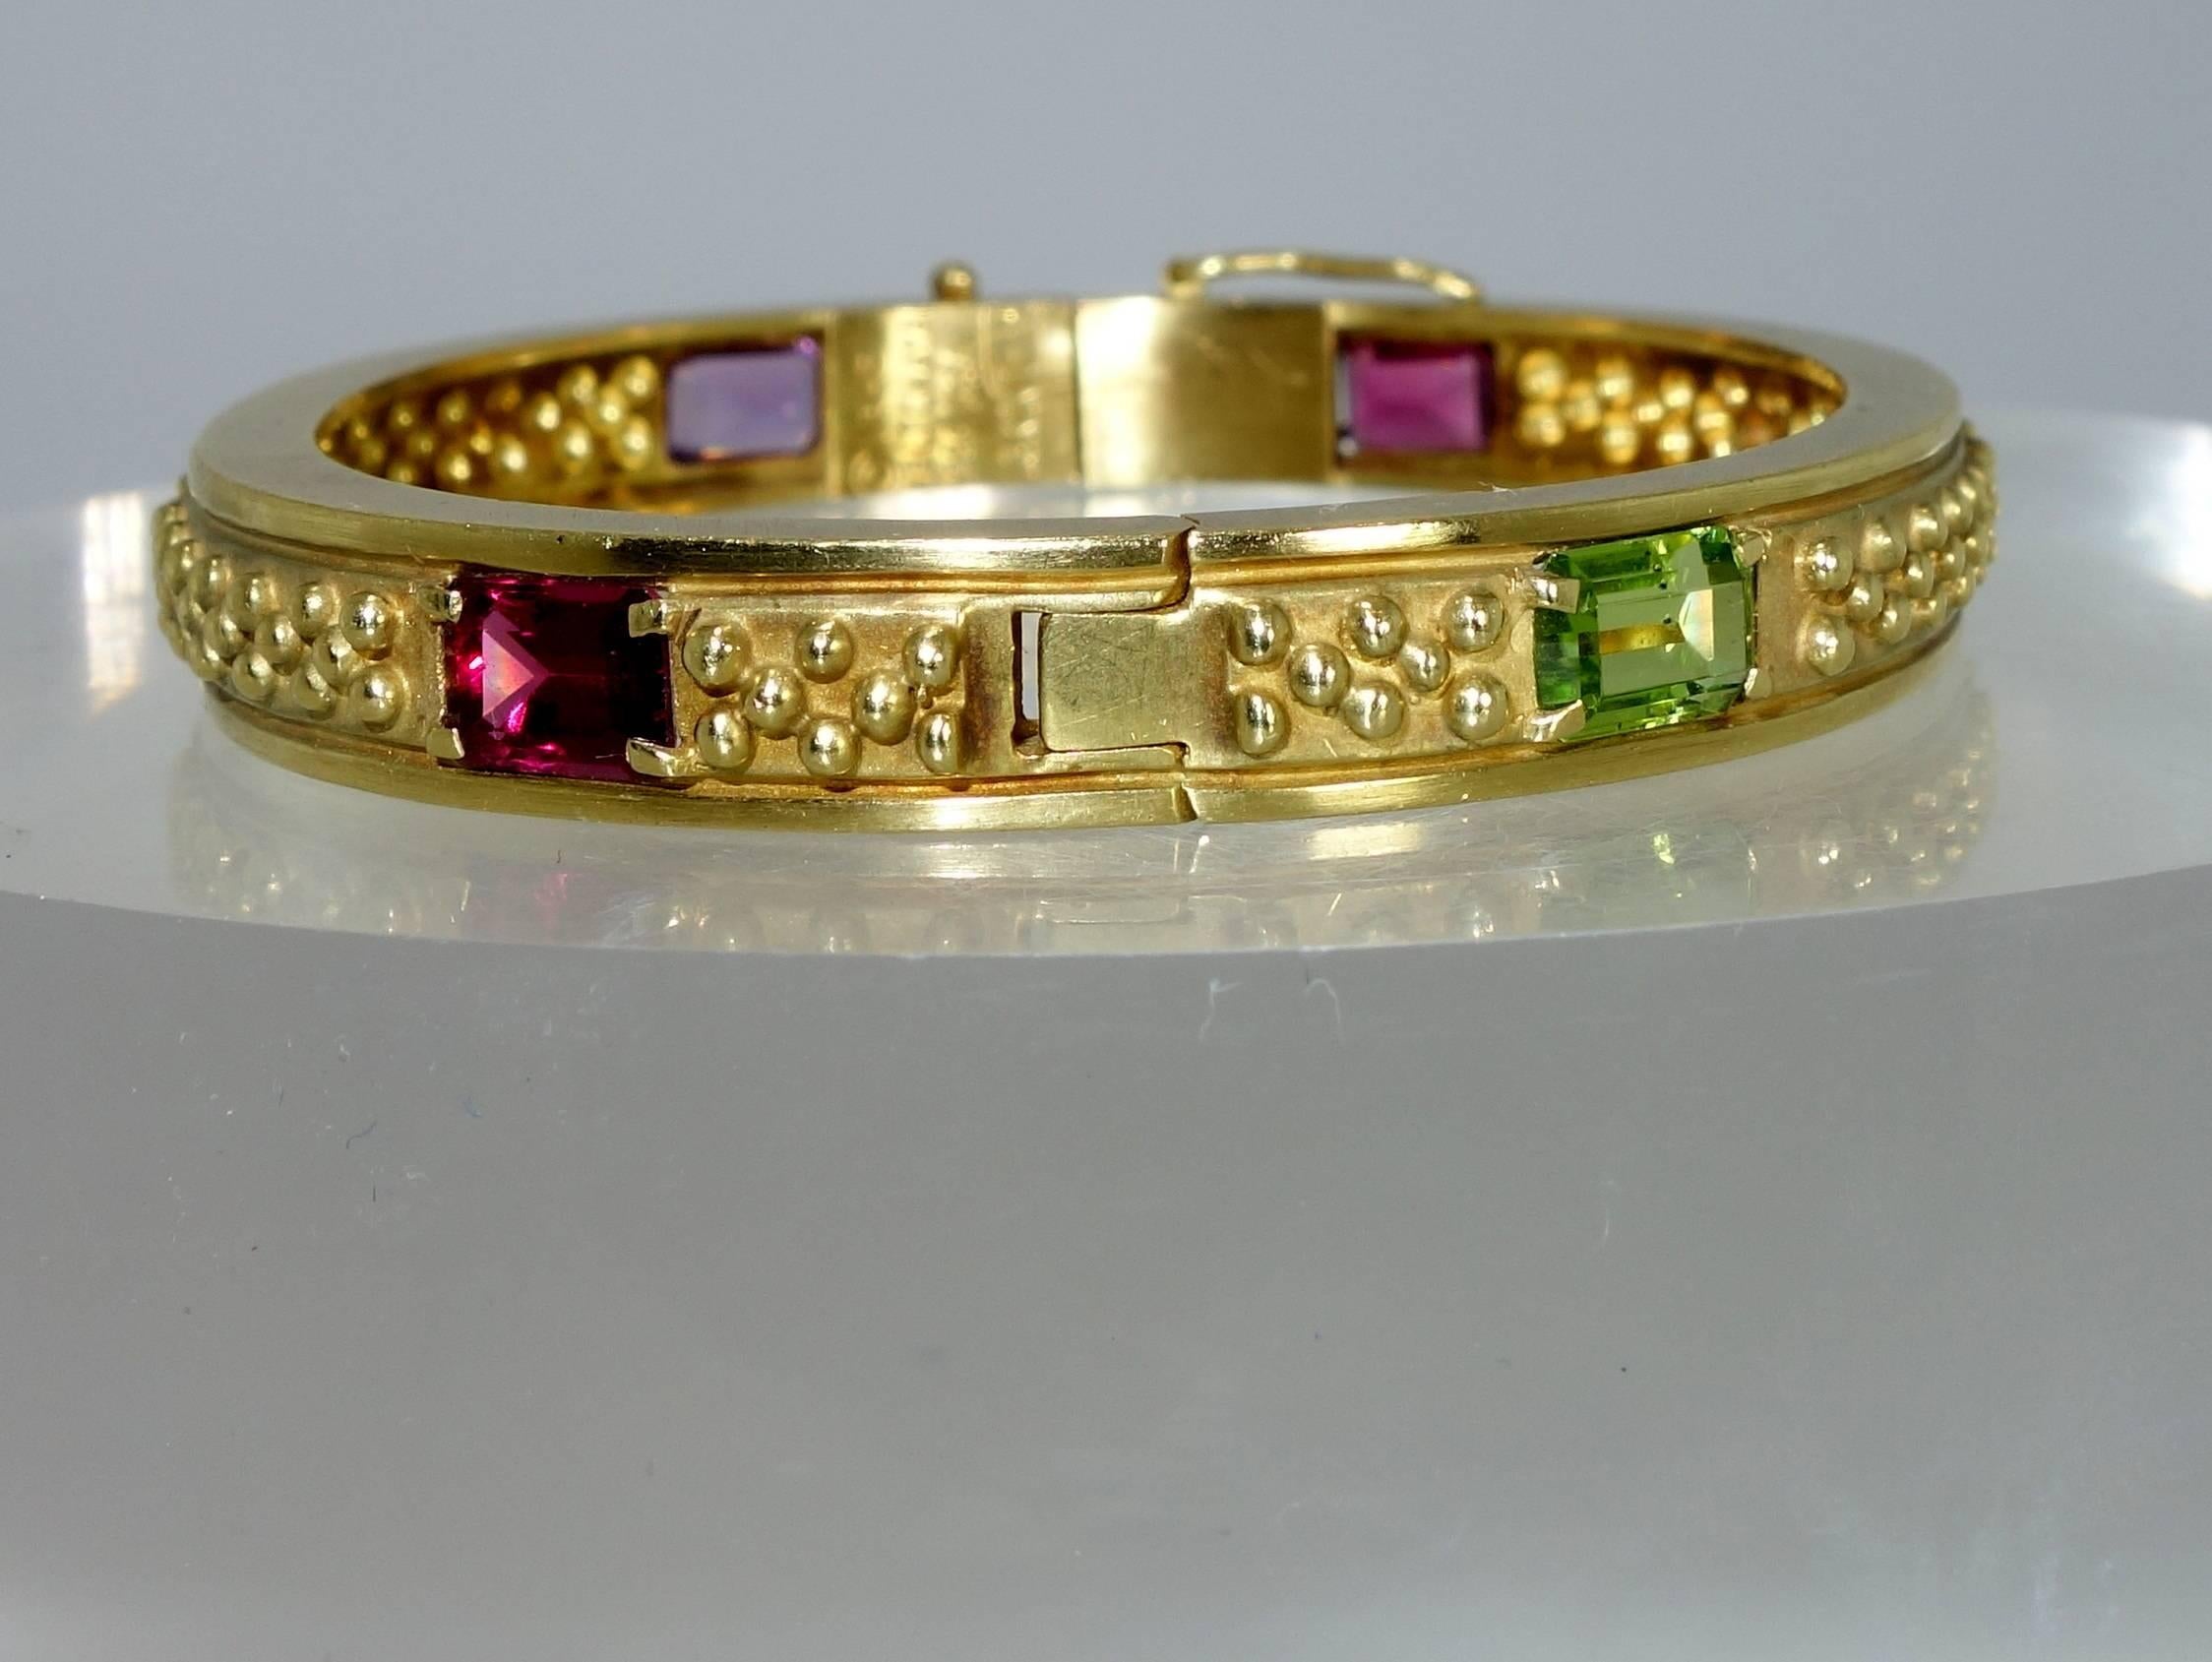 18K yellow gold with 6 rectangular cut stones: pink and green tourmaline, garnet, amethyst and peridot all come together to create a colorful statement for the wrist.  This piece weighs 31.6 grams. This piece is a good size and will fit most wrists.